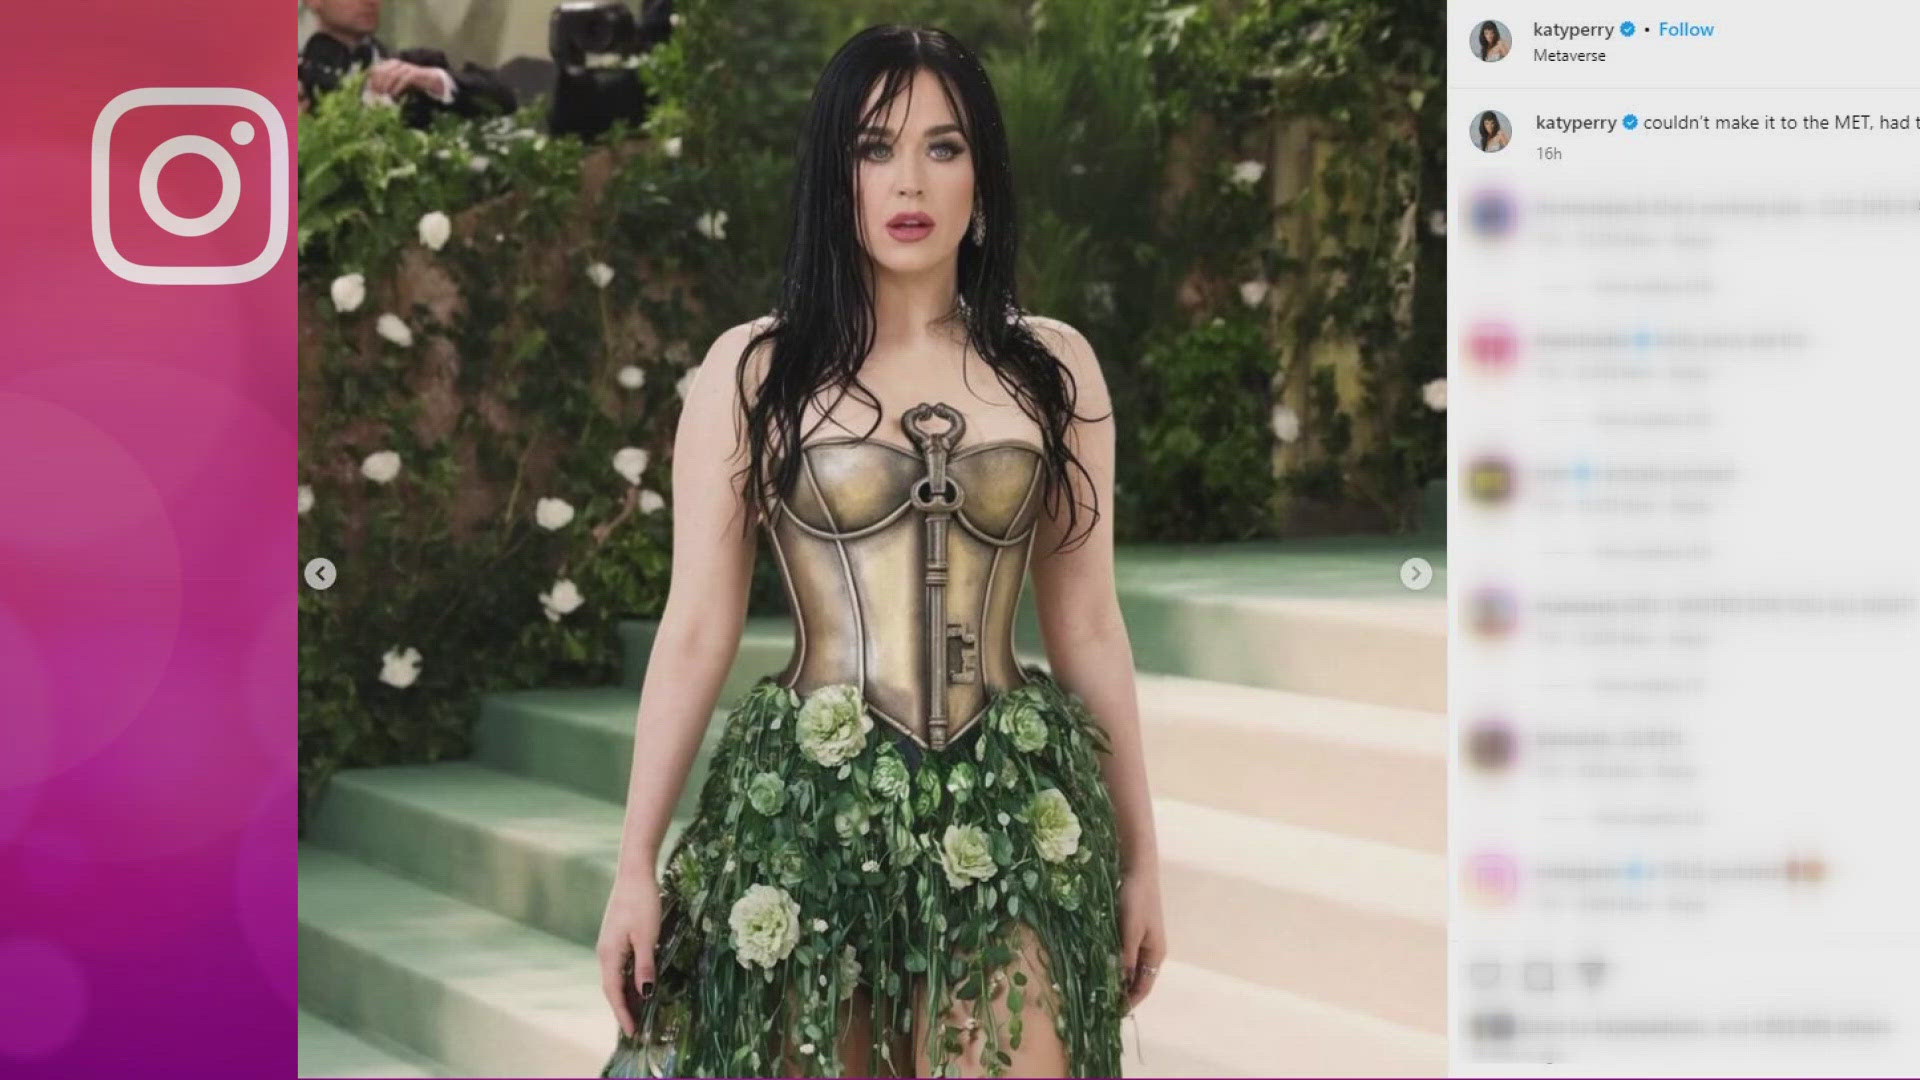 Katy Perry "appeared" in some of the pictures at the Met Gala — but she wasn't even there!